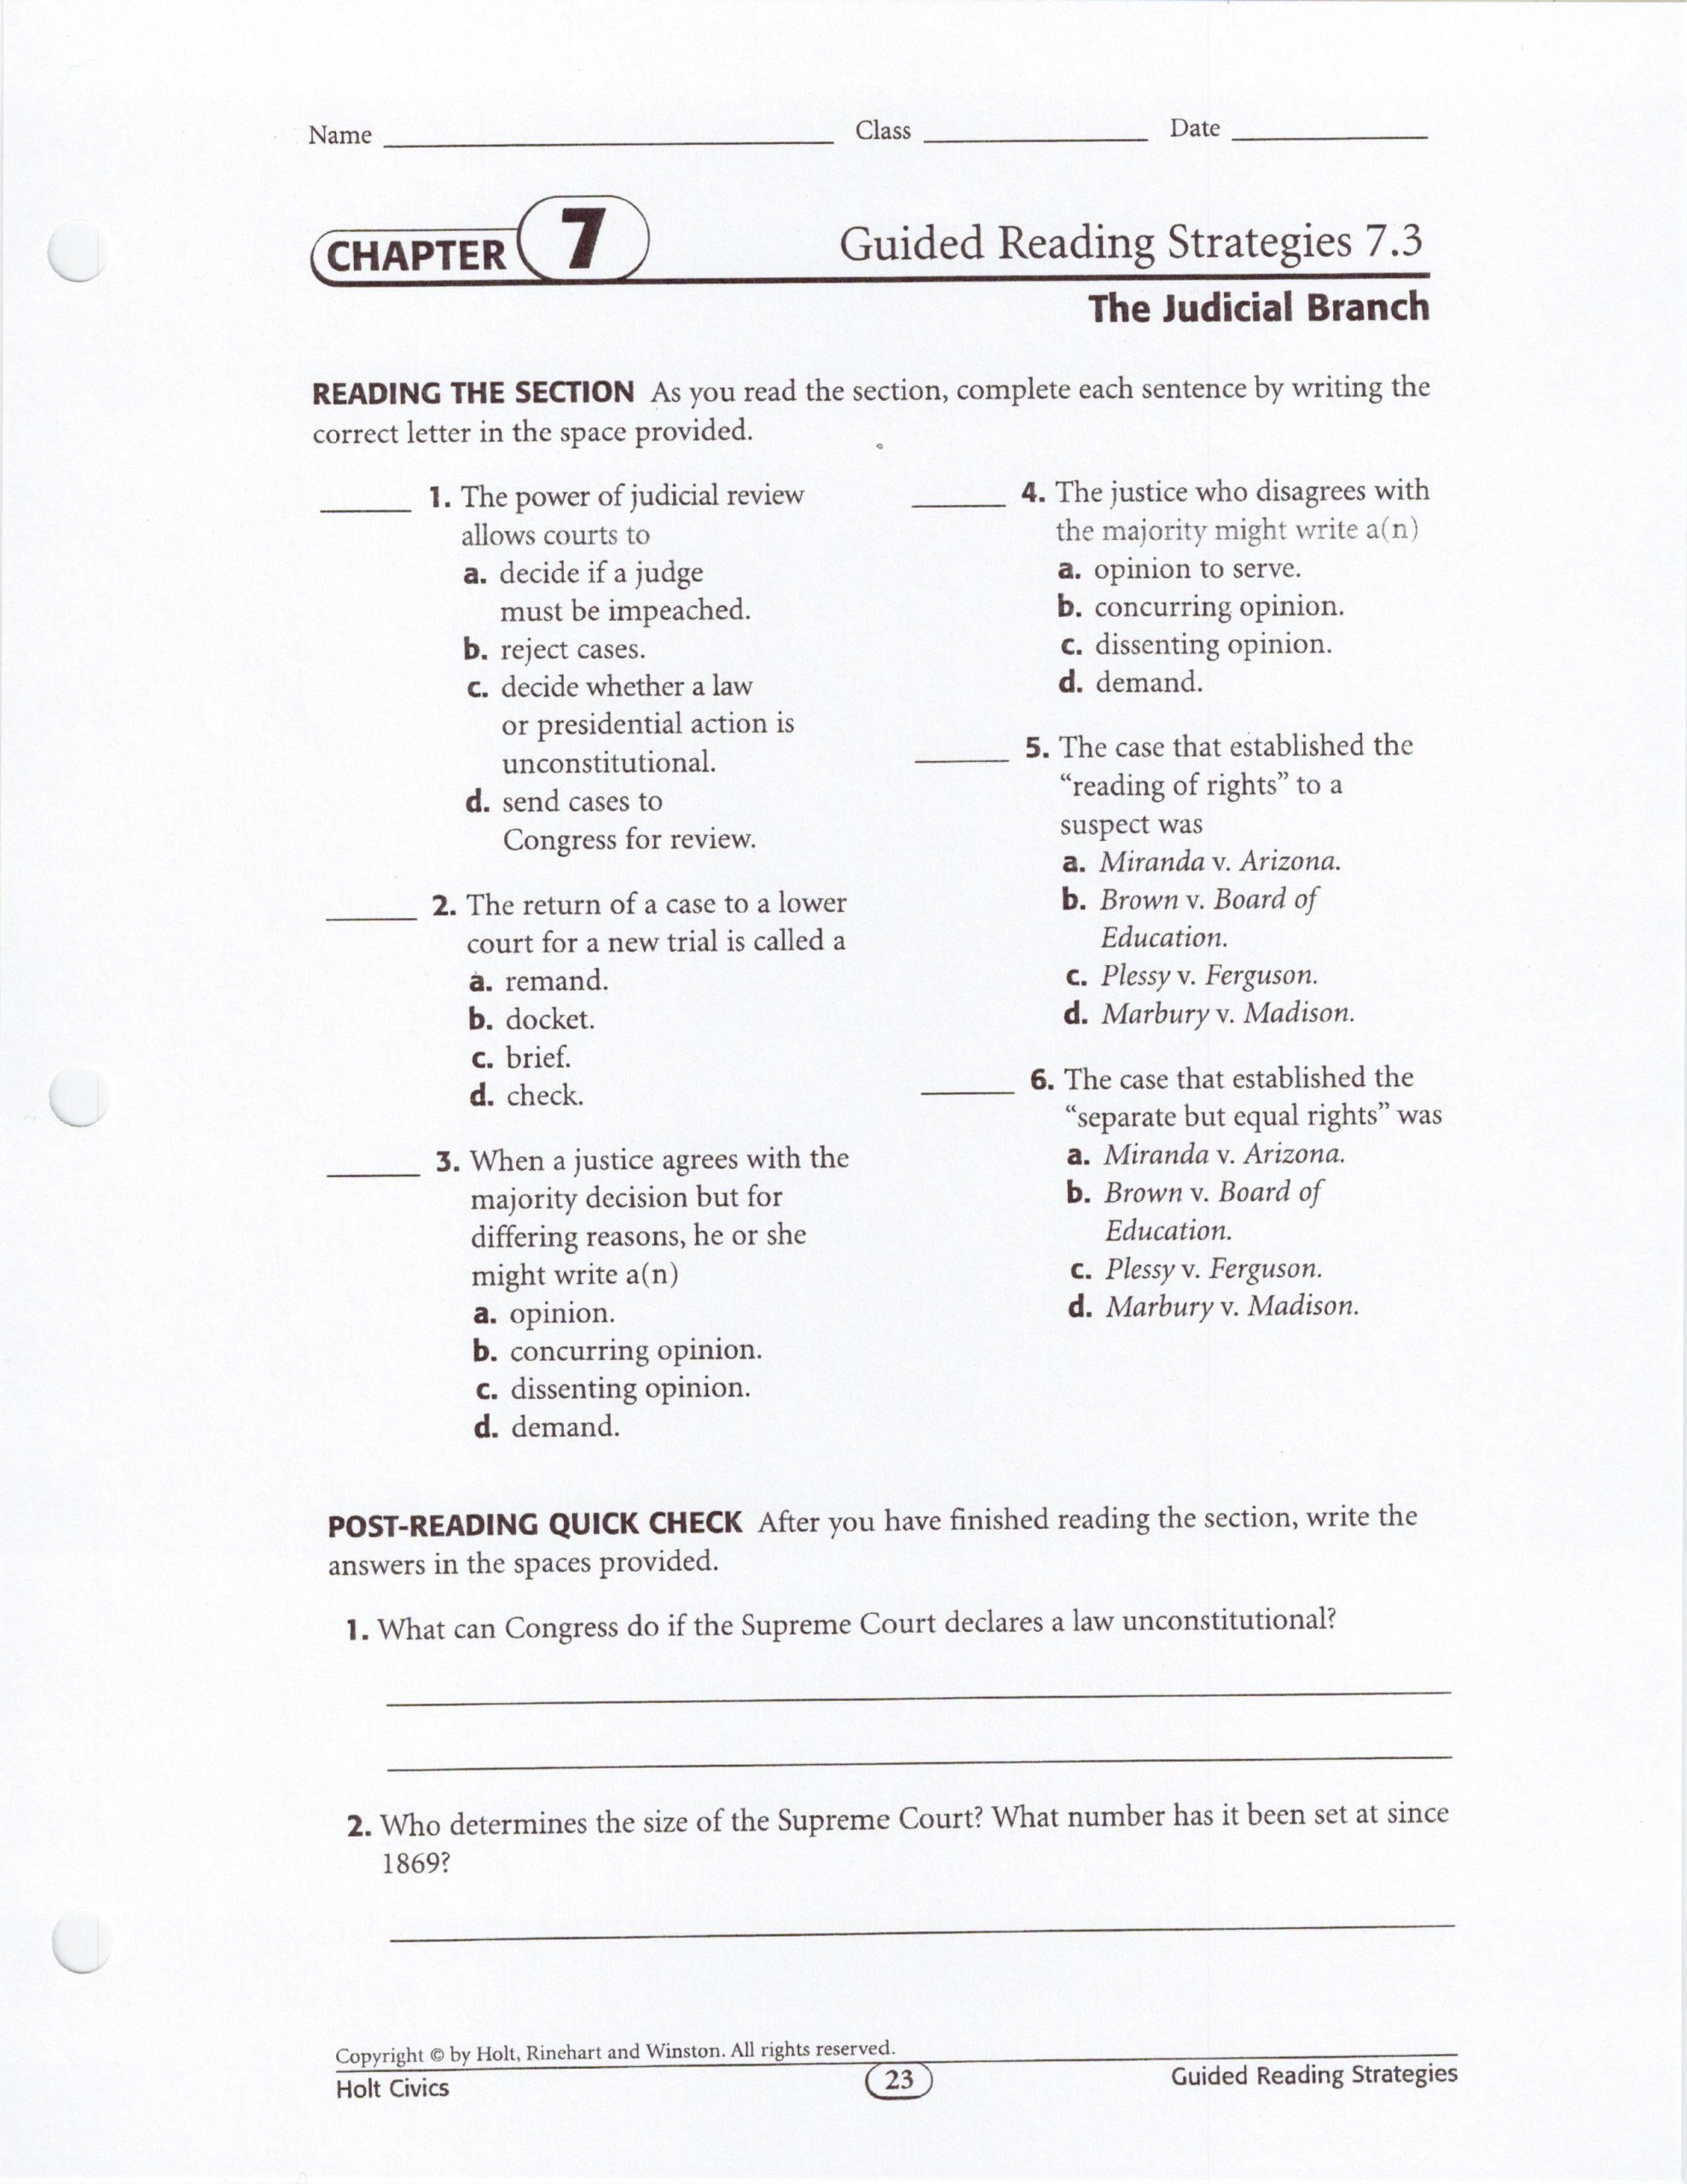 The Electoral Process Worksheet Answers 27 Chapter 7 the Electoral Process Worksheet Answers